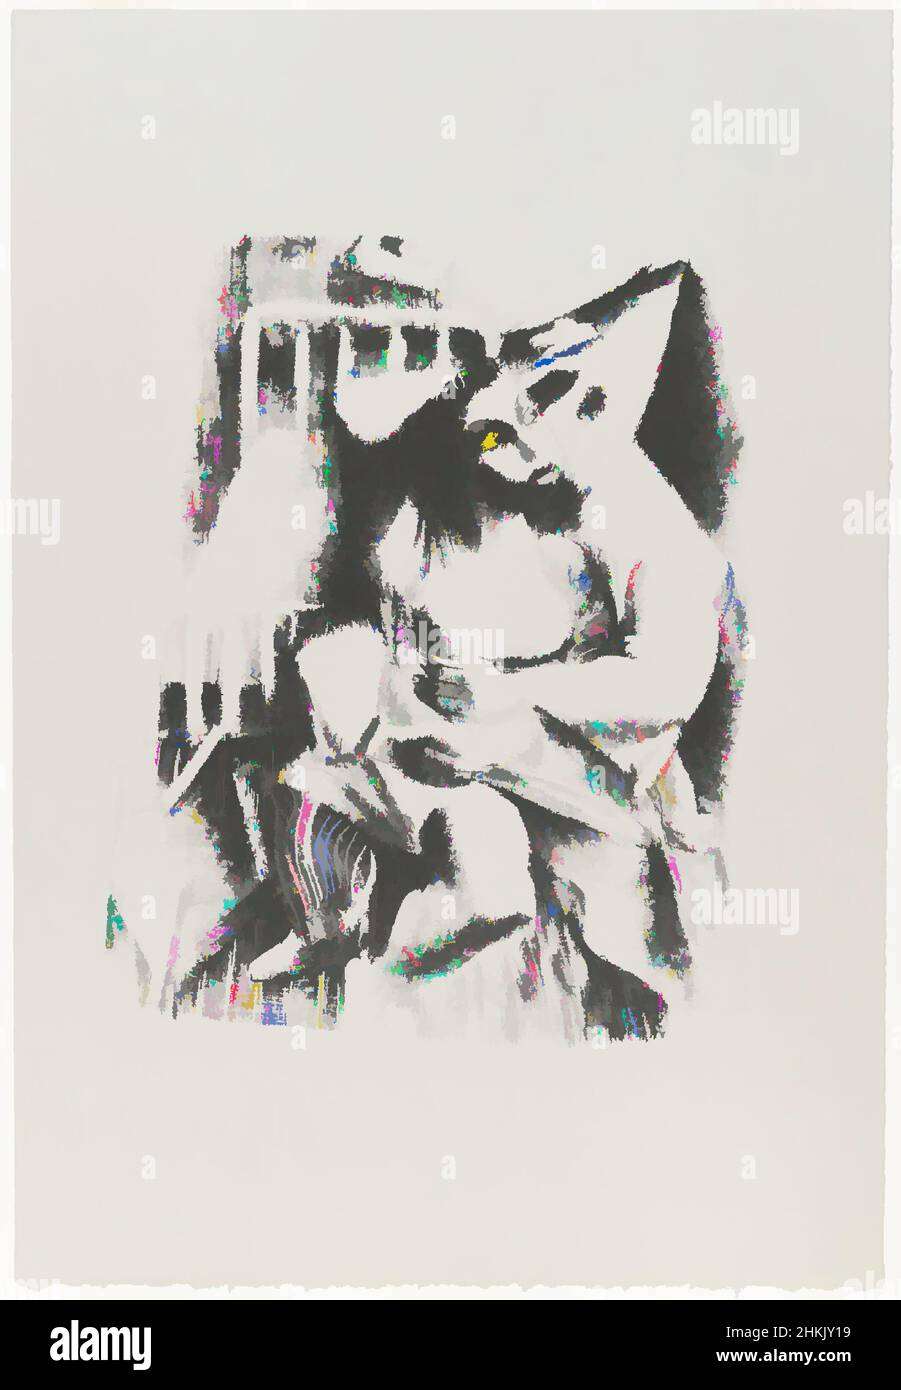 Art inspired by Lovers, Ernest Crichlow, American, 1914-2005, Lithograph on white wove paper, 1938, Sheet: 22 1/4 x 15 3/16 in., 56.5 x 38.6 cm, 20thC, abduction, African-American, born in Brooklyn, Brooklyn artist, contemporary art, hood, Ku Klux Klan, race relations, social injustice, Classic works modernized by Artotop with a splash of modernity. Shapes, color and value, eye-catching visual impact on art. Emotions through freedom of artworks in a contemporary way. A timeless message pursuing a wildly creative new direction. Artists turning to the digital medium and creating the Artotop NFT Stock Photo